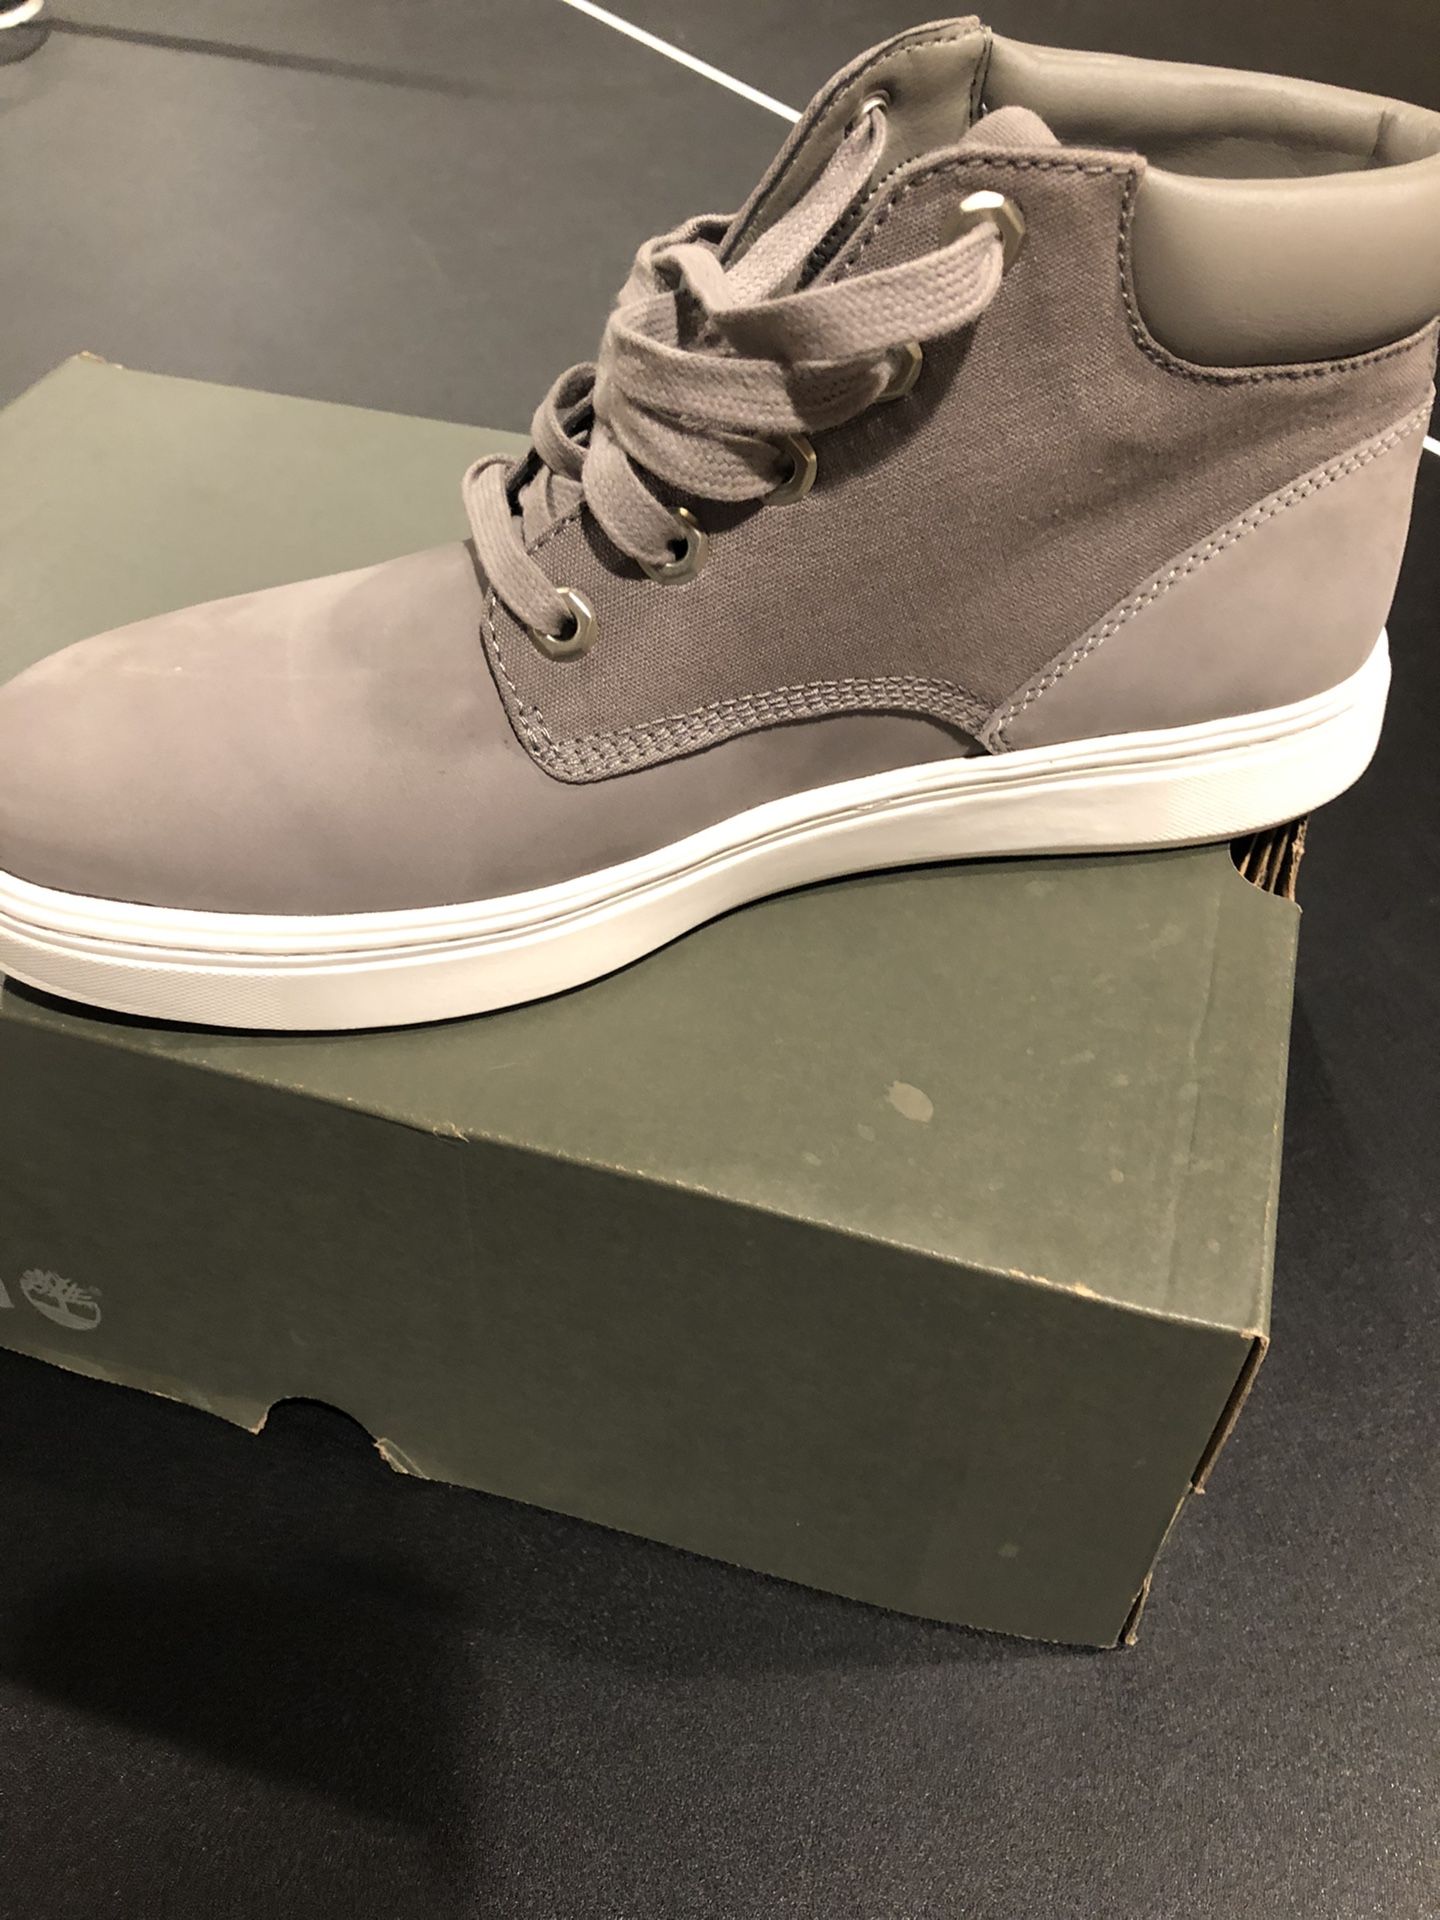 Brand New Women’s Size 10 & Size 9.5 Timberland $50 each 